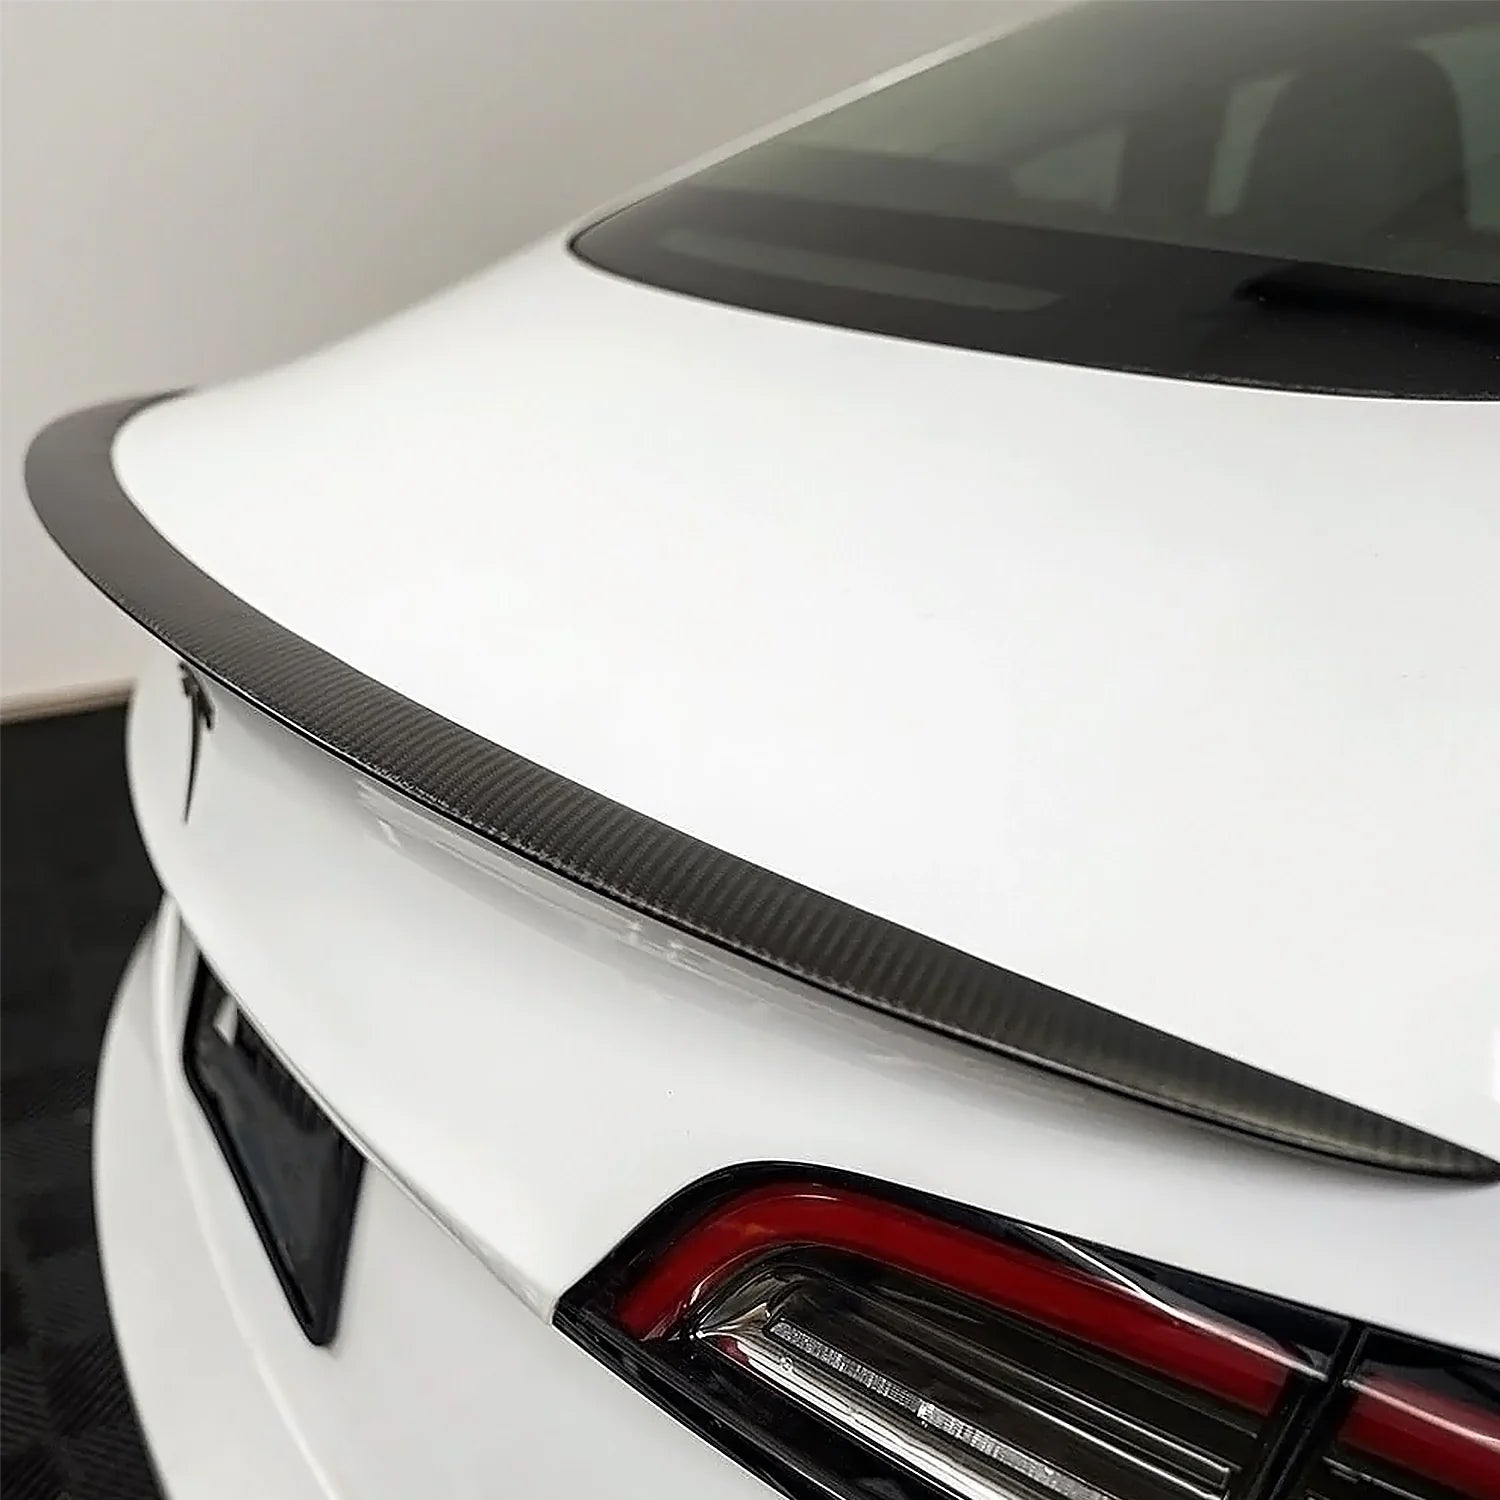 The Benefits of Installing a Carbon Fiber Performance Rear Spoiler on Your Tesla Model 3